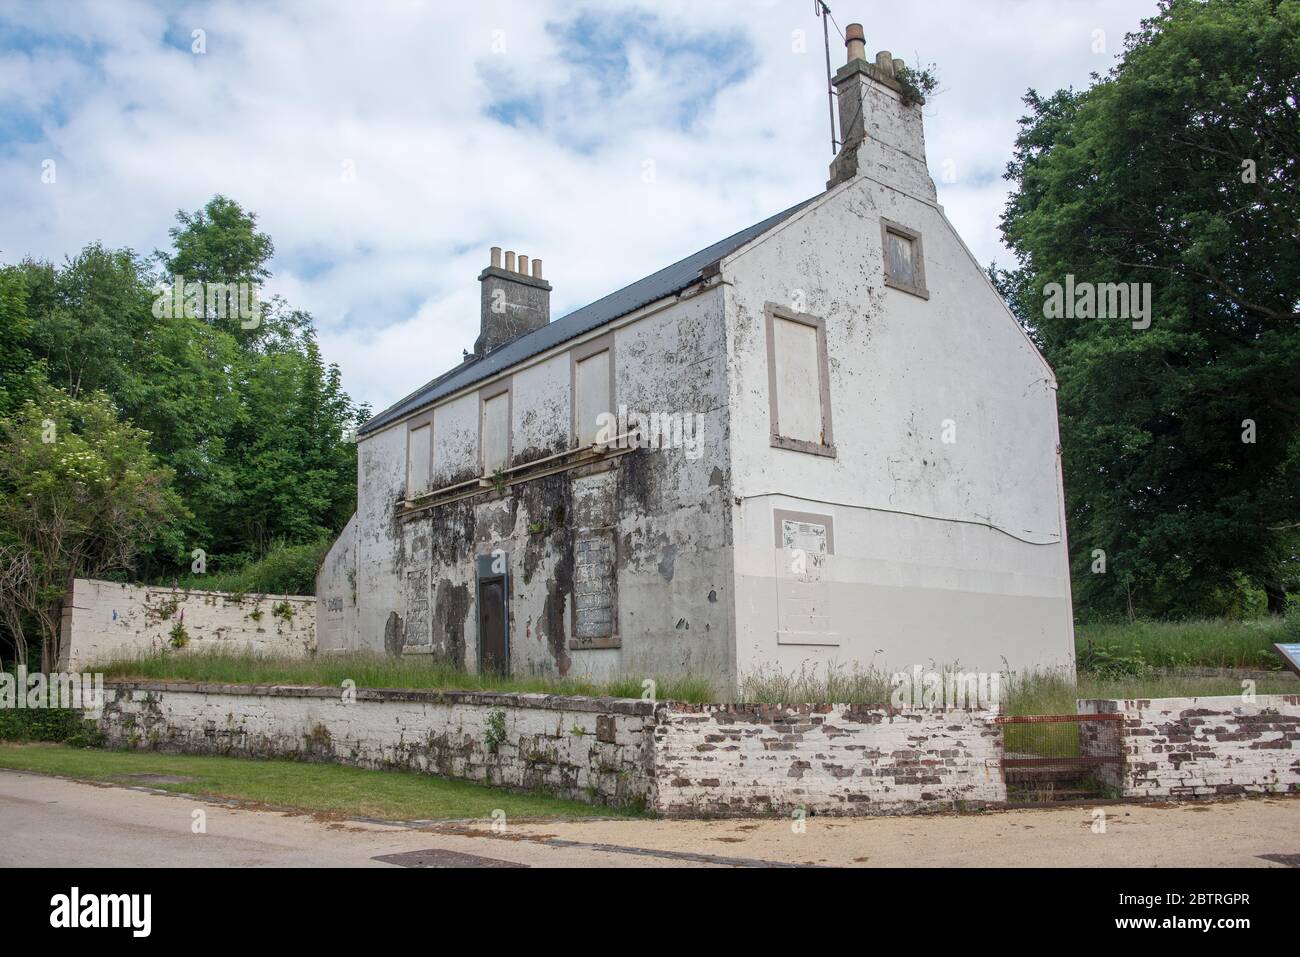 L'ex Lock Keepers House di Applecross su Forth & Clyde Canal, Glasgow Foto Stock